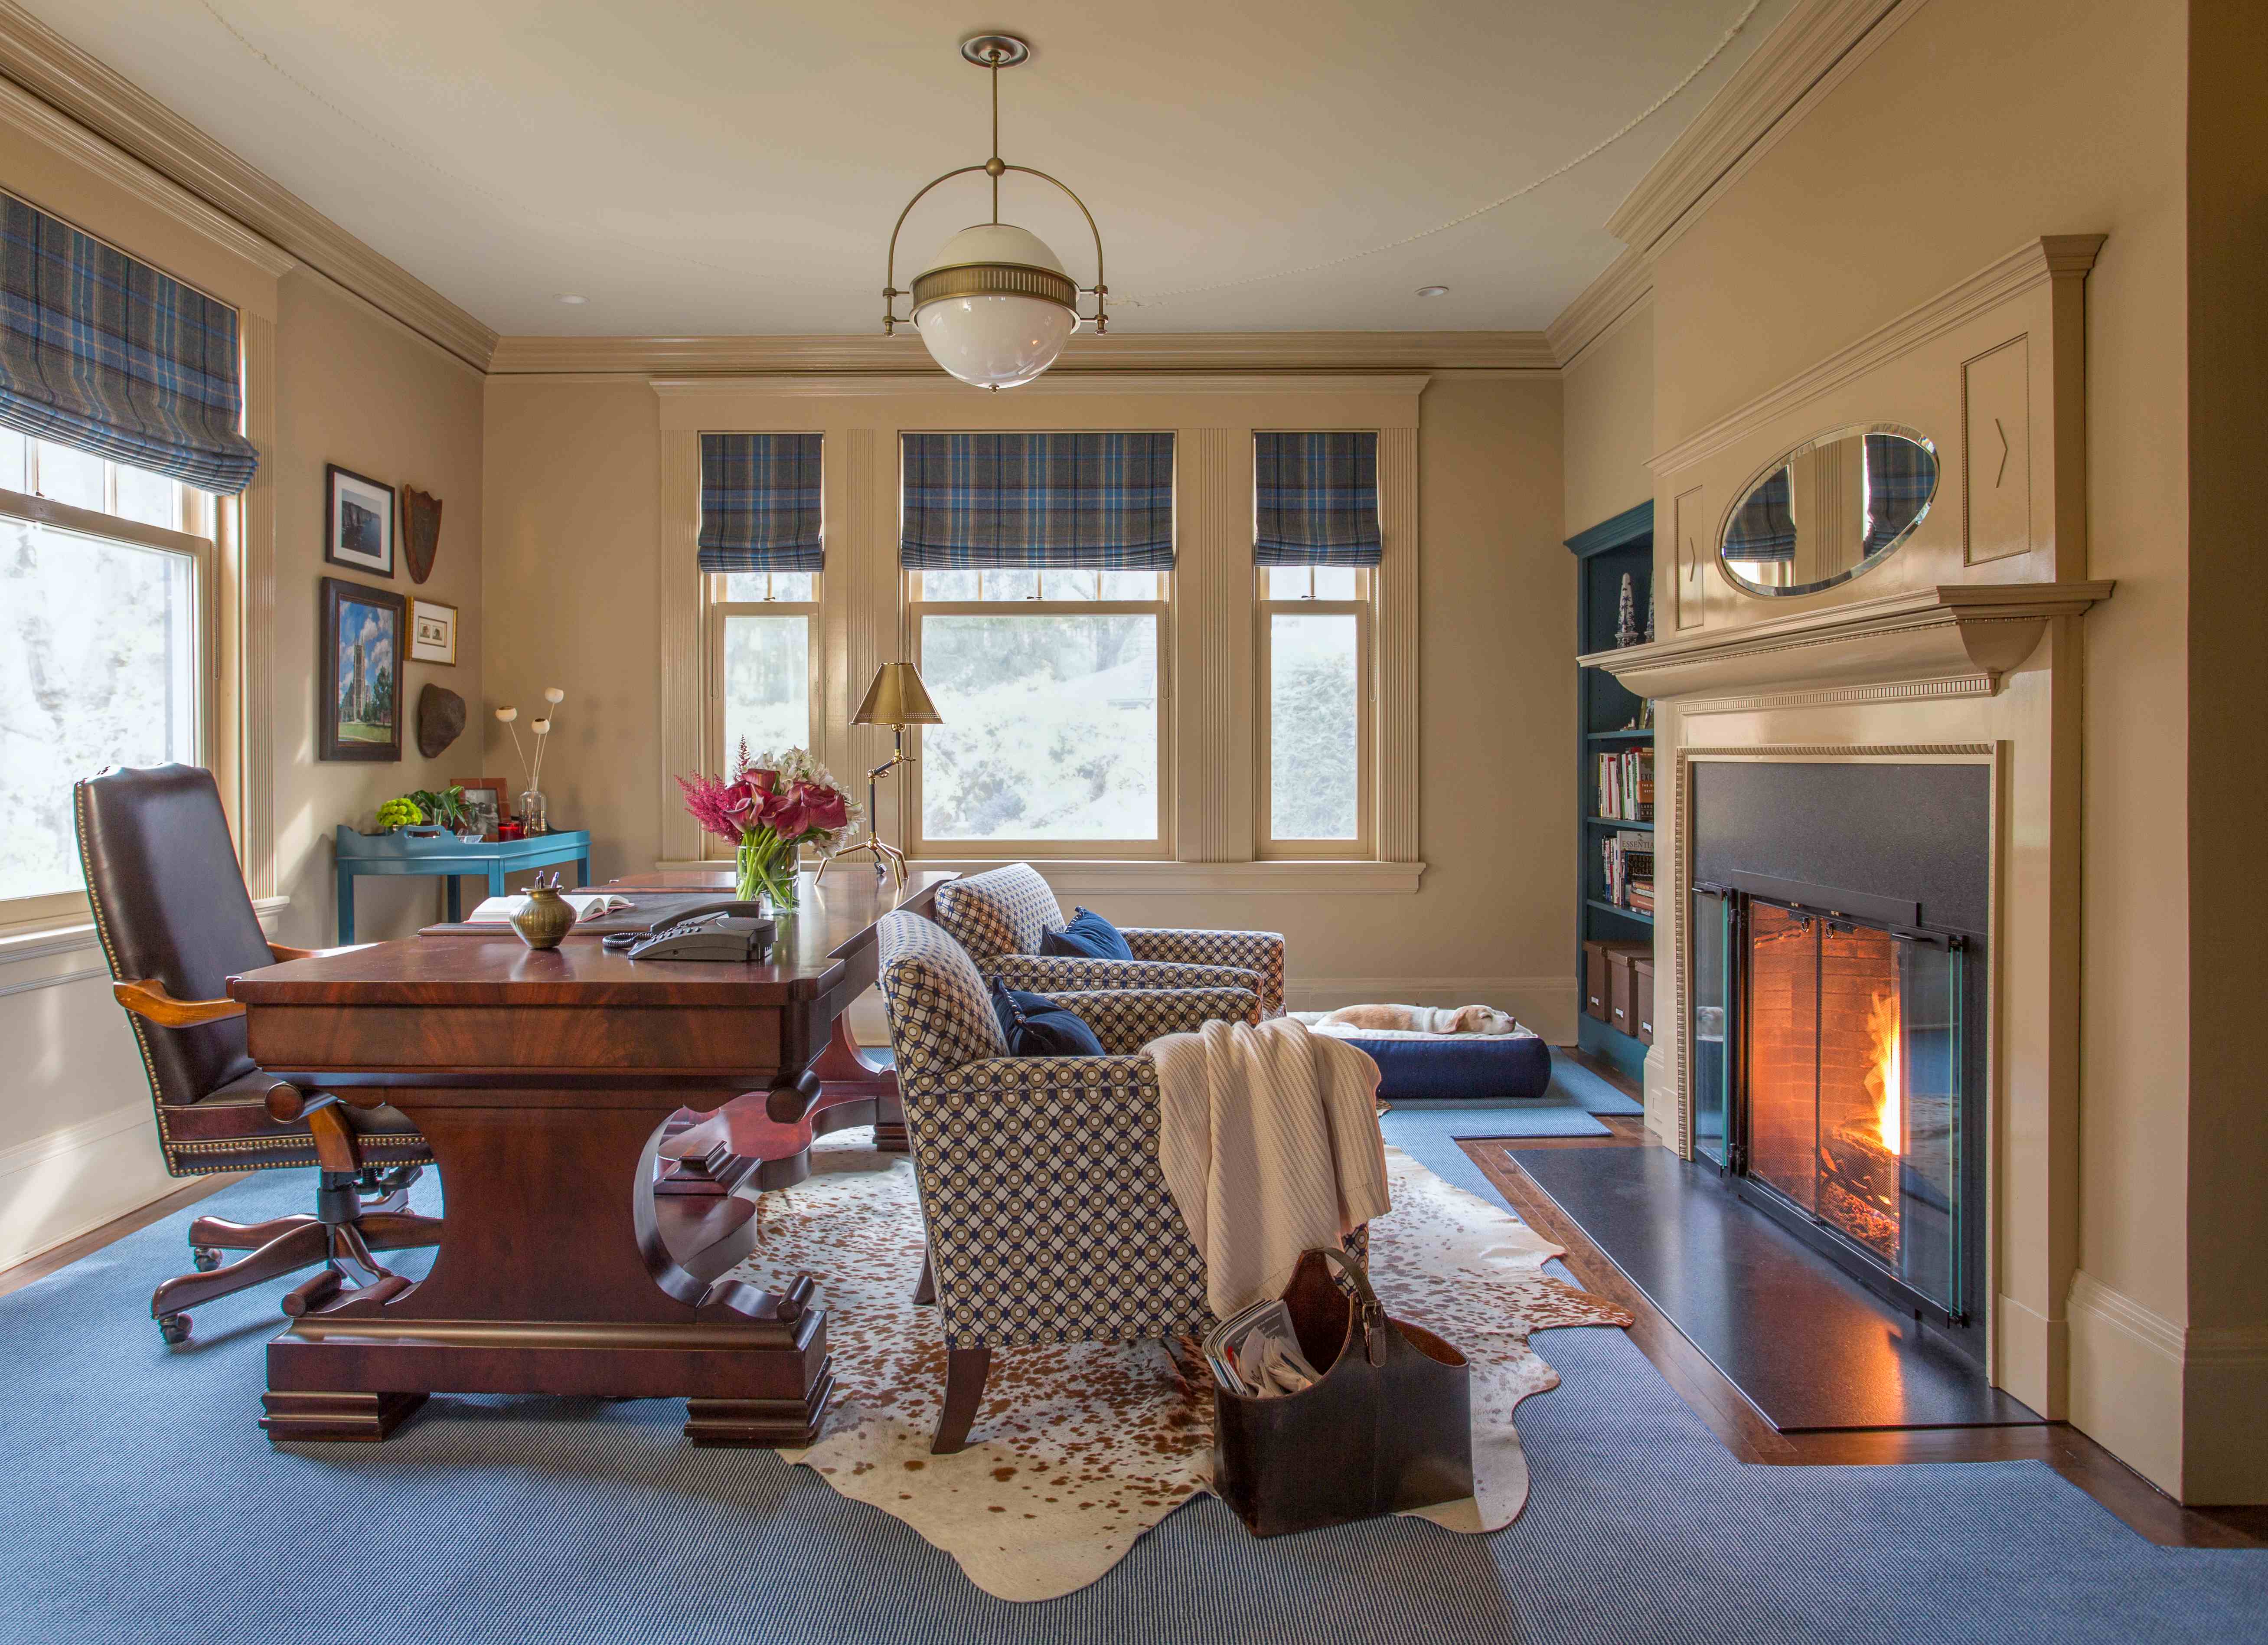 One Room Challenge Fall 2015: Manbrary Reveal | Kelly Rogers Interiors | Interiors for Families